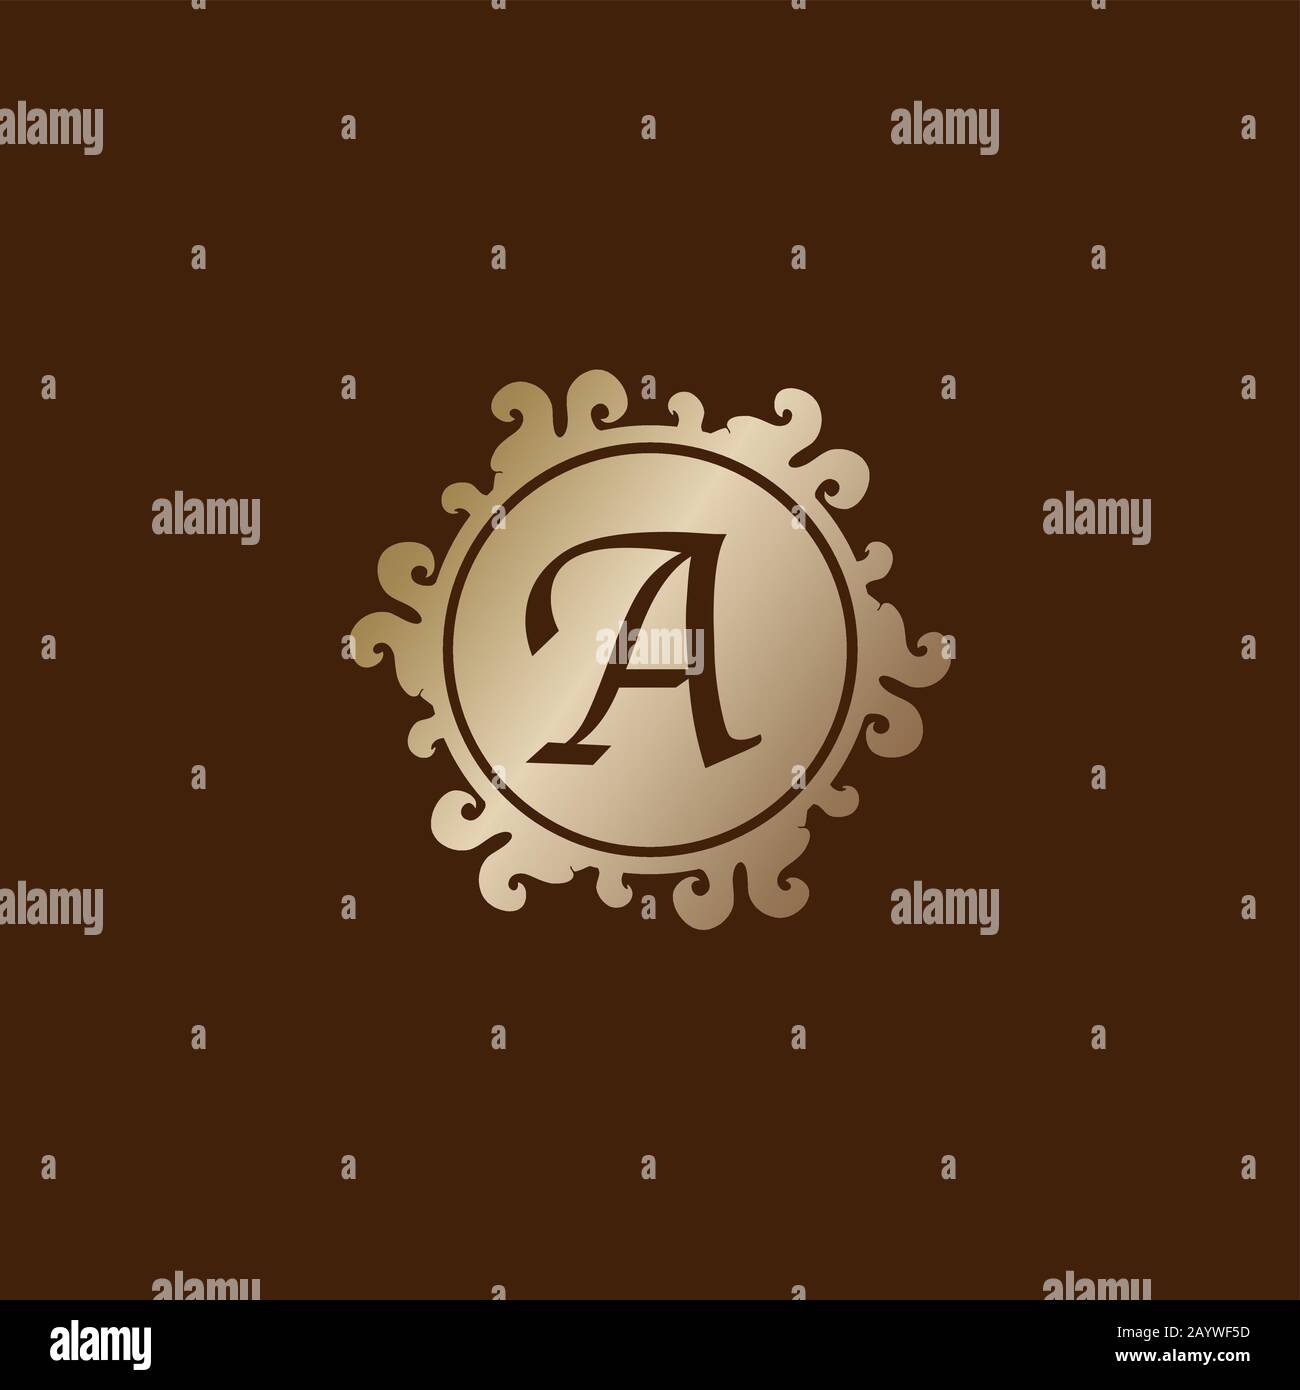 Alphabet letters brown background